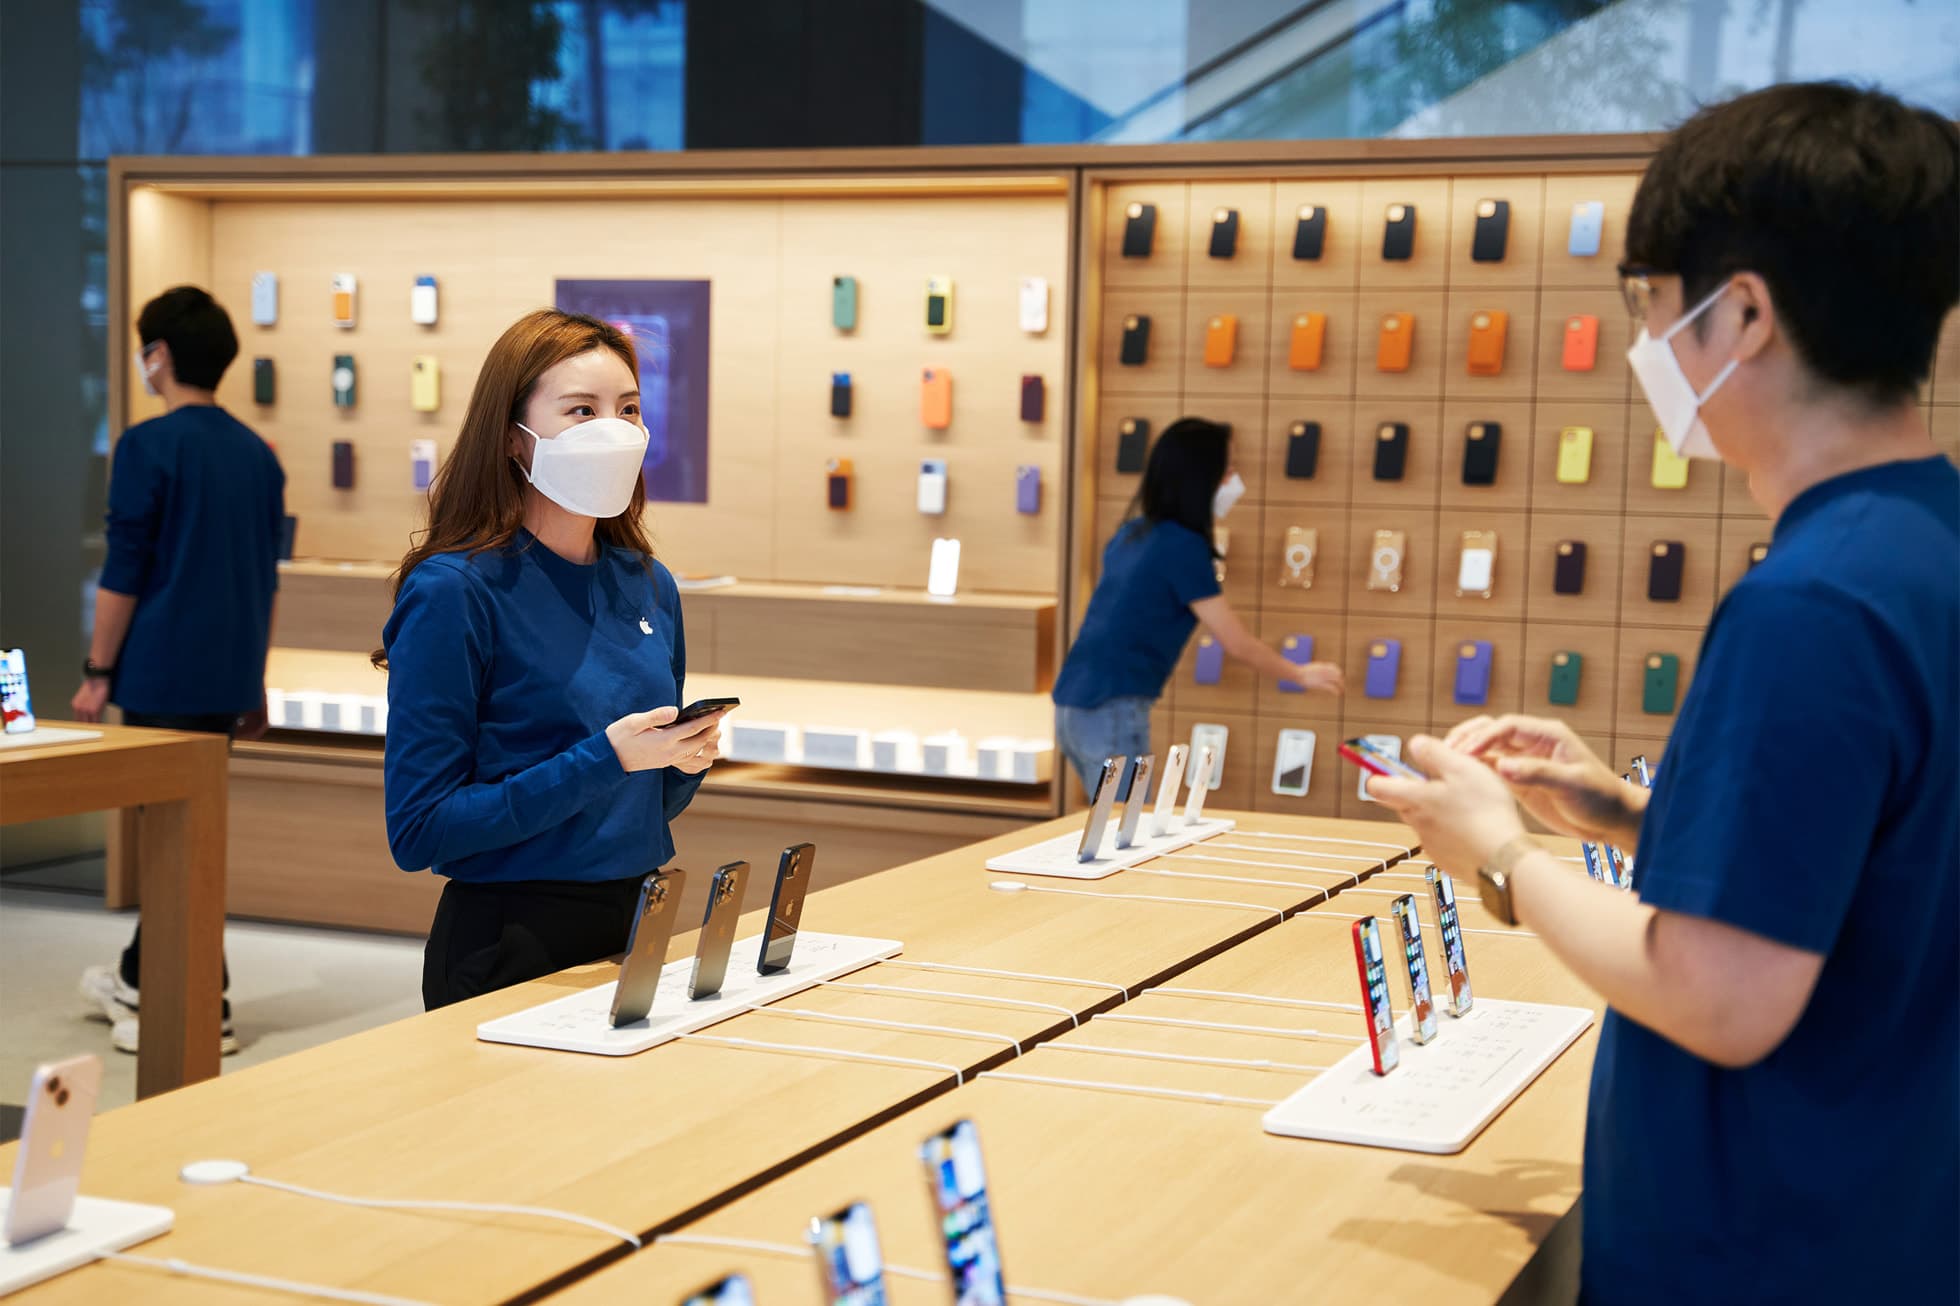 The store’s 220-person team, which collectively speaks 11 languages, is ready to help customers discover the best of Apple.